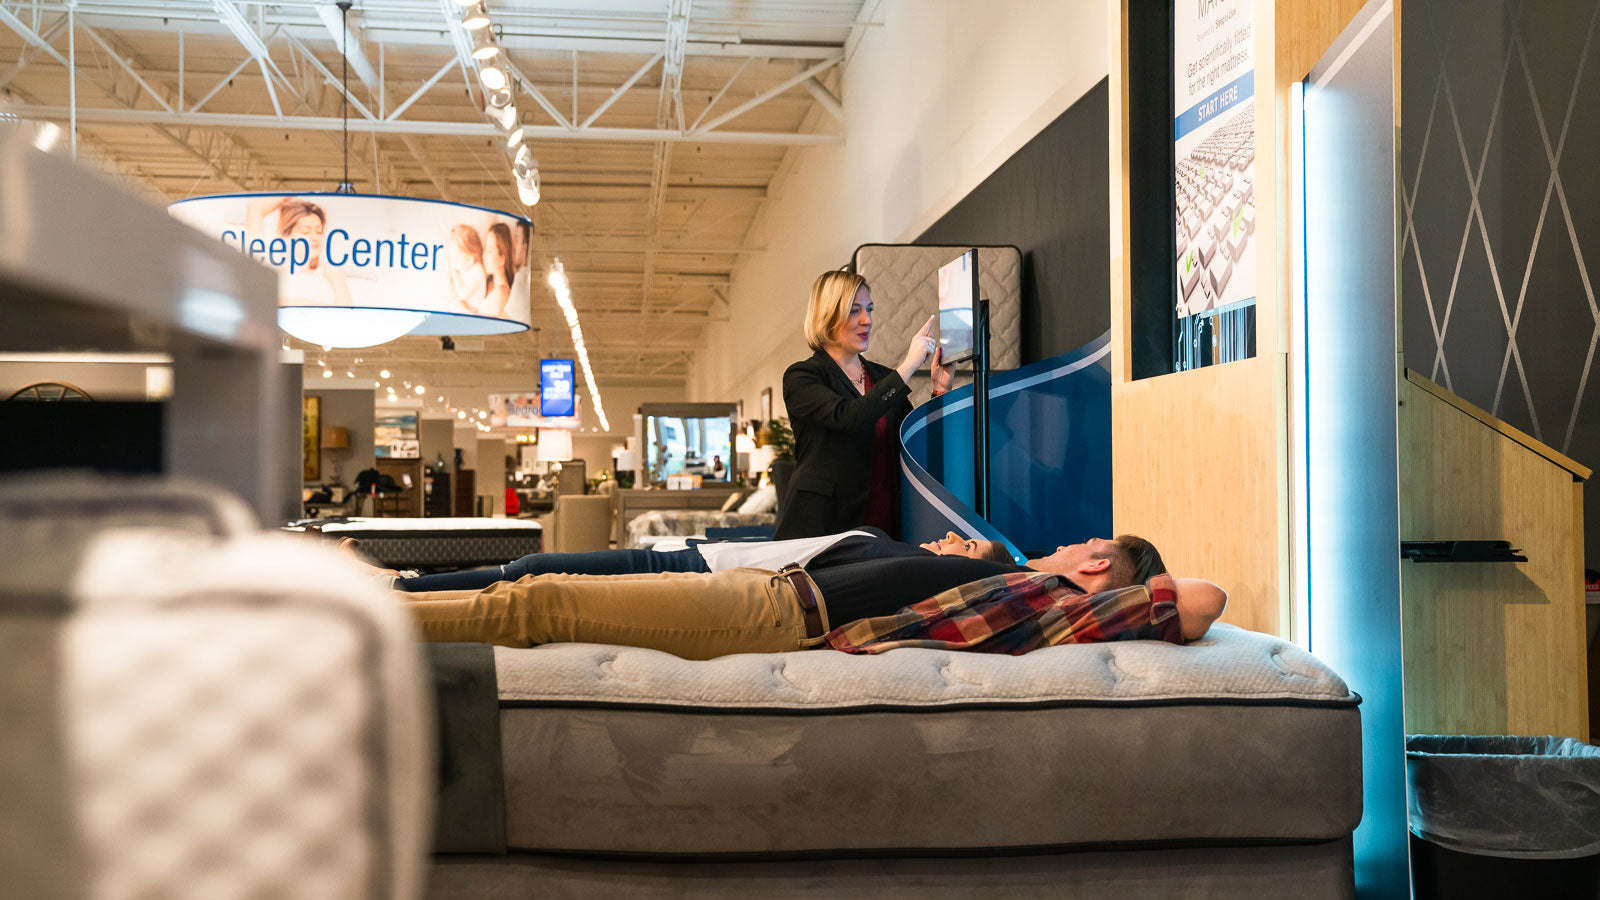 mattress shopping advice for couples